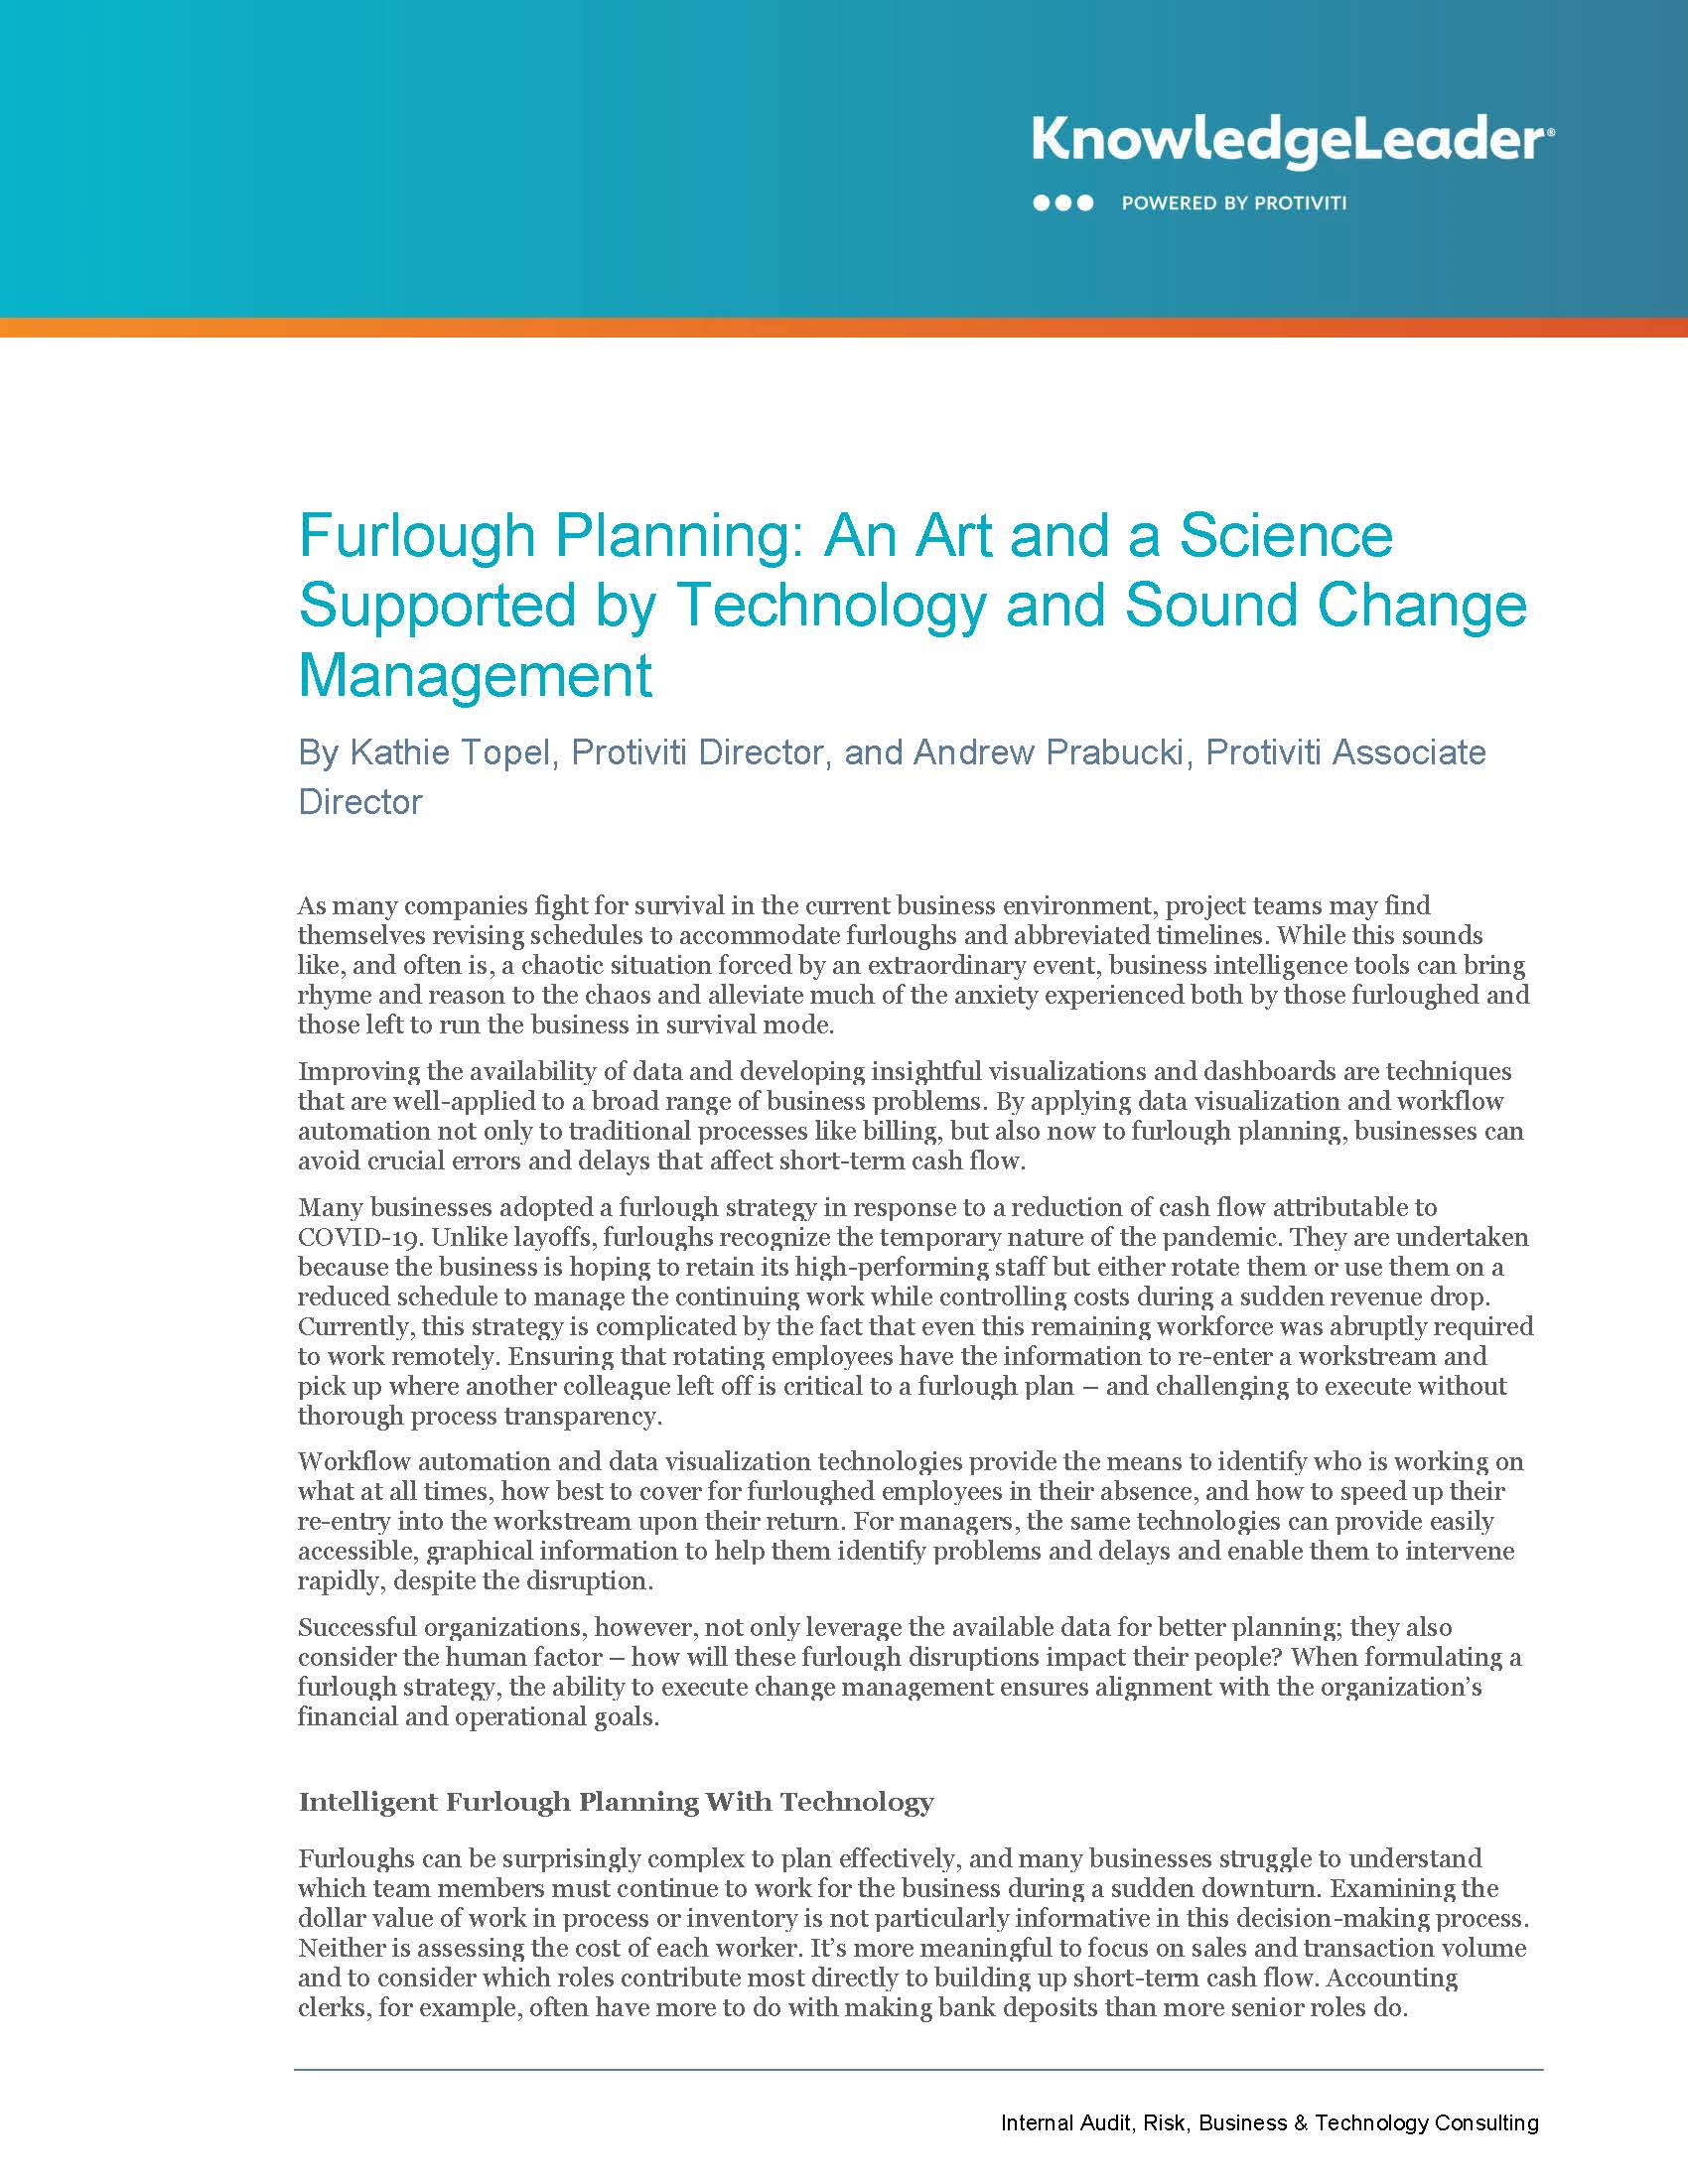 Screenshot of the first page of Furlough Planning An Art and a Science Supported by Technology and Sound Change Management